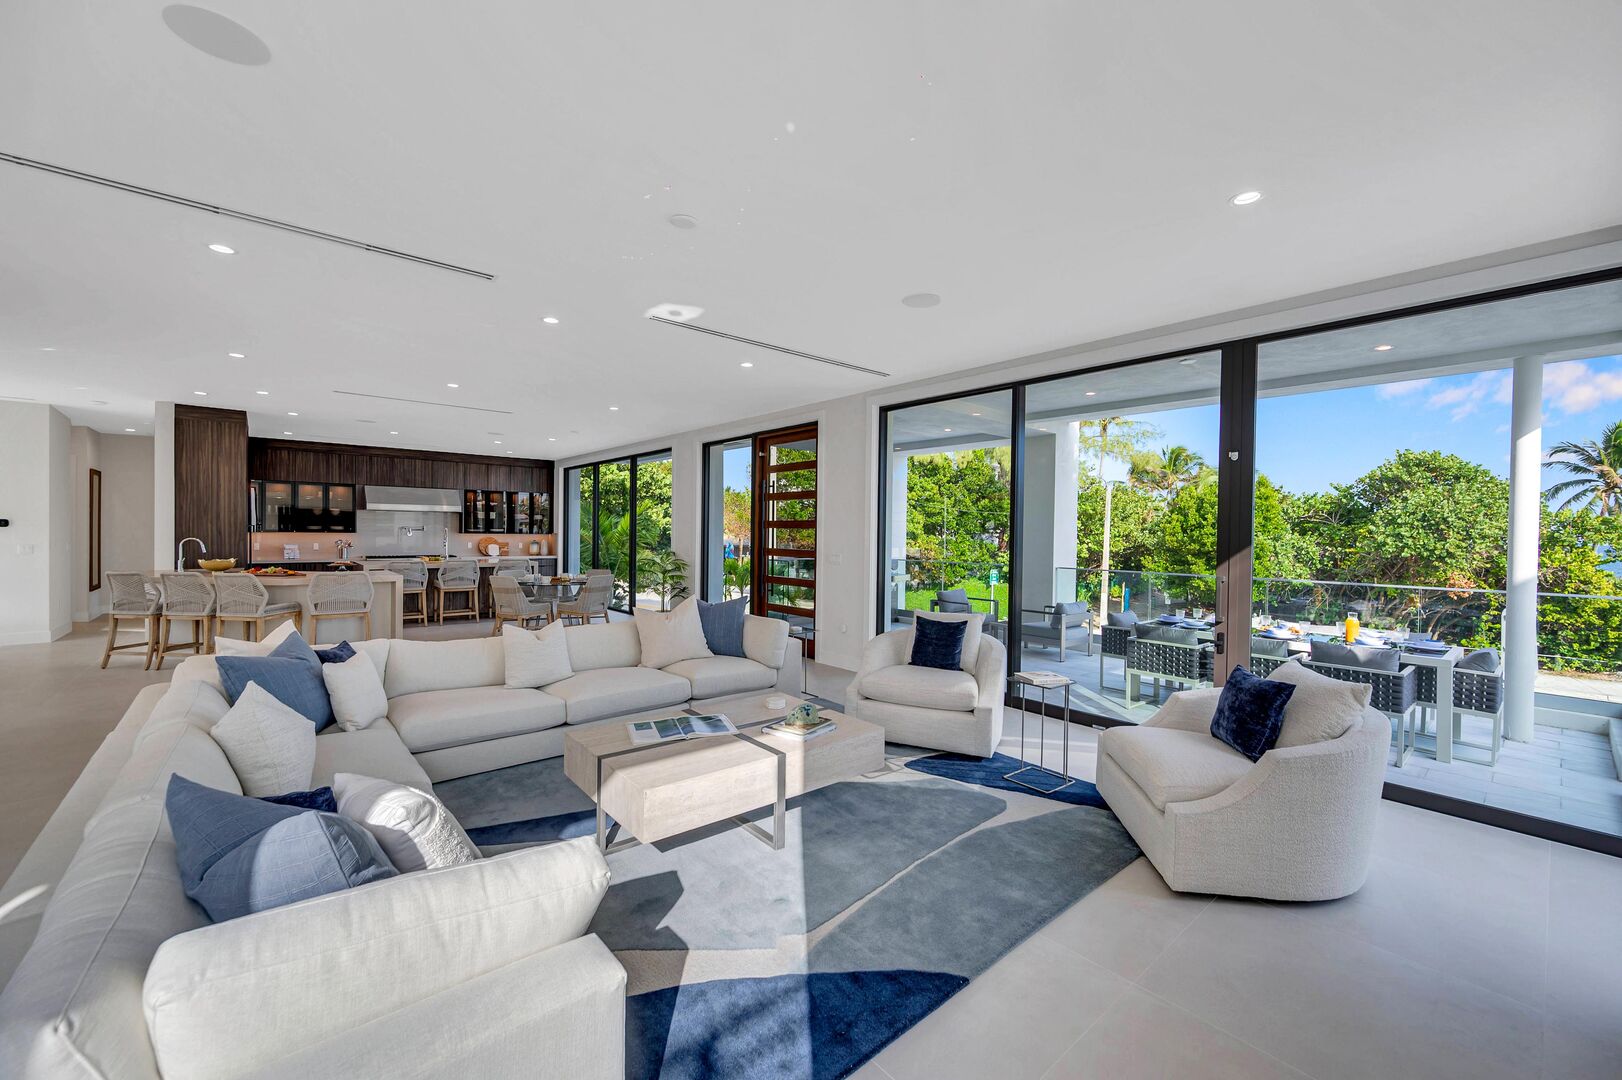 Open plan expansive and serene living area with a chef's kitchen, breakfast nook, wet bar boasting Ocean View through floor to ceiling windows.